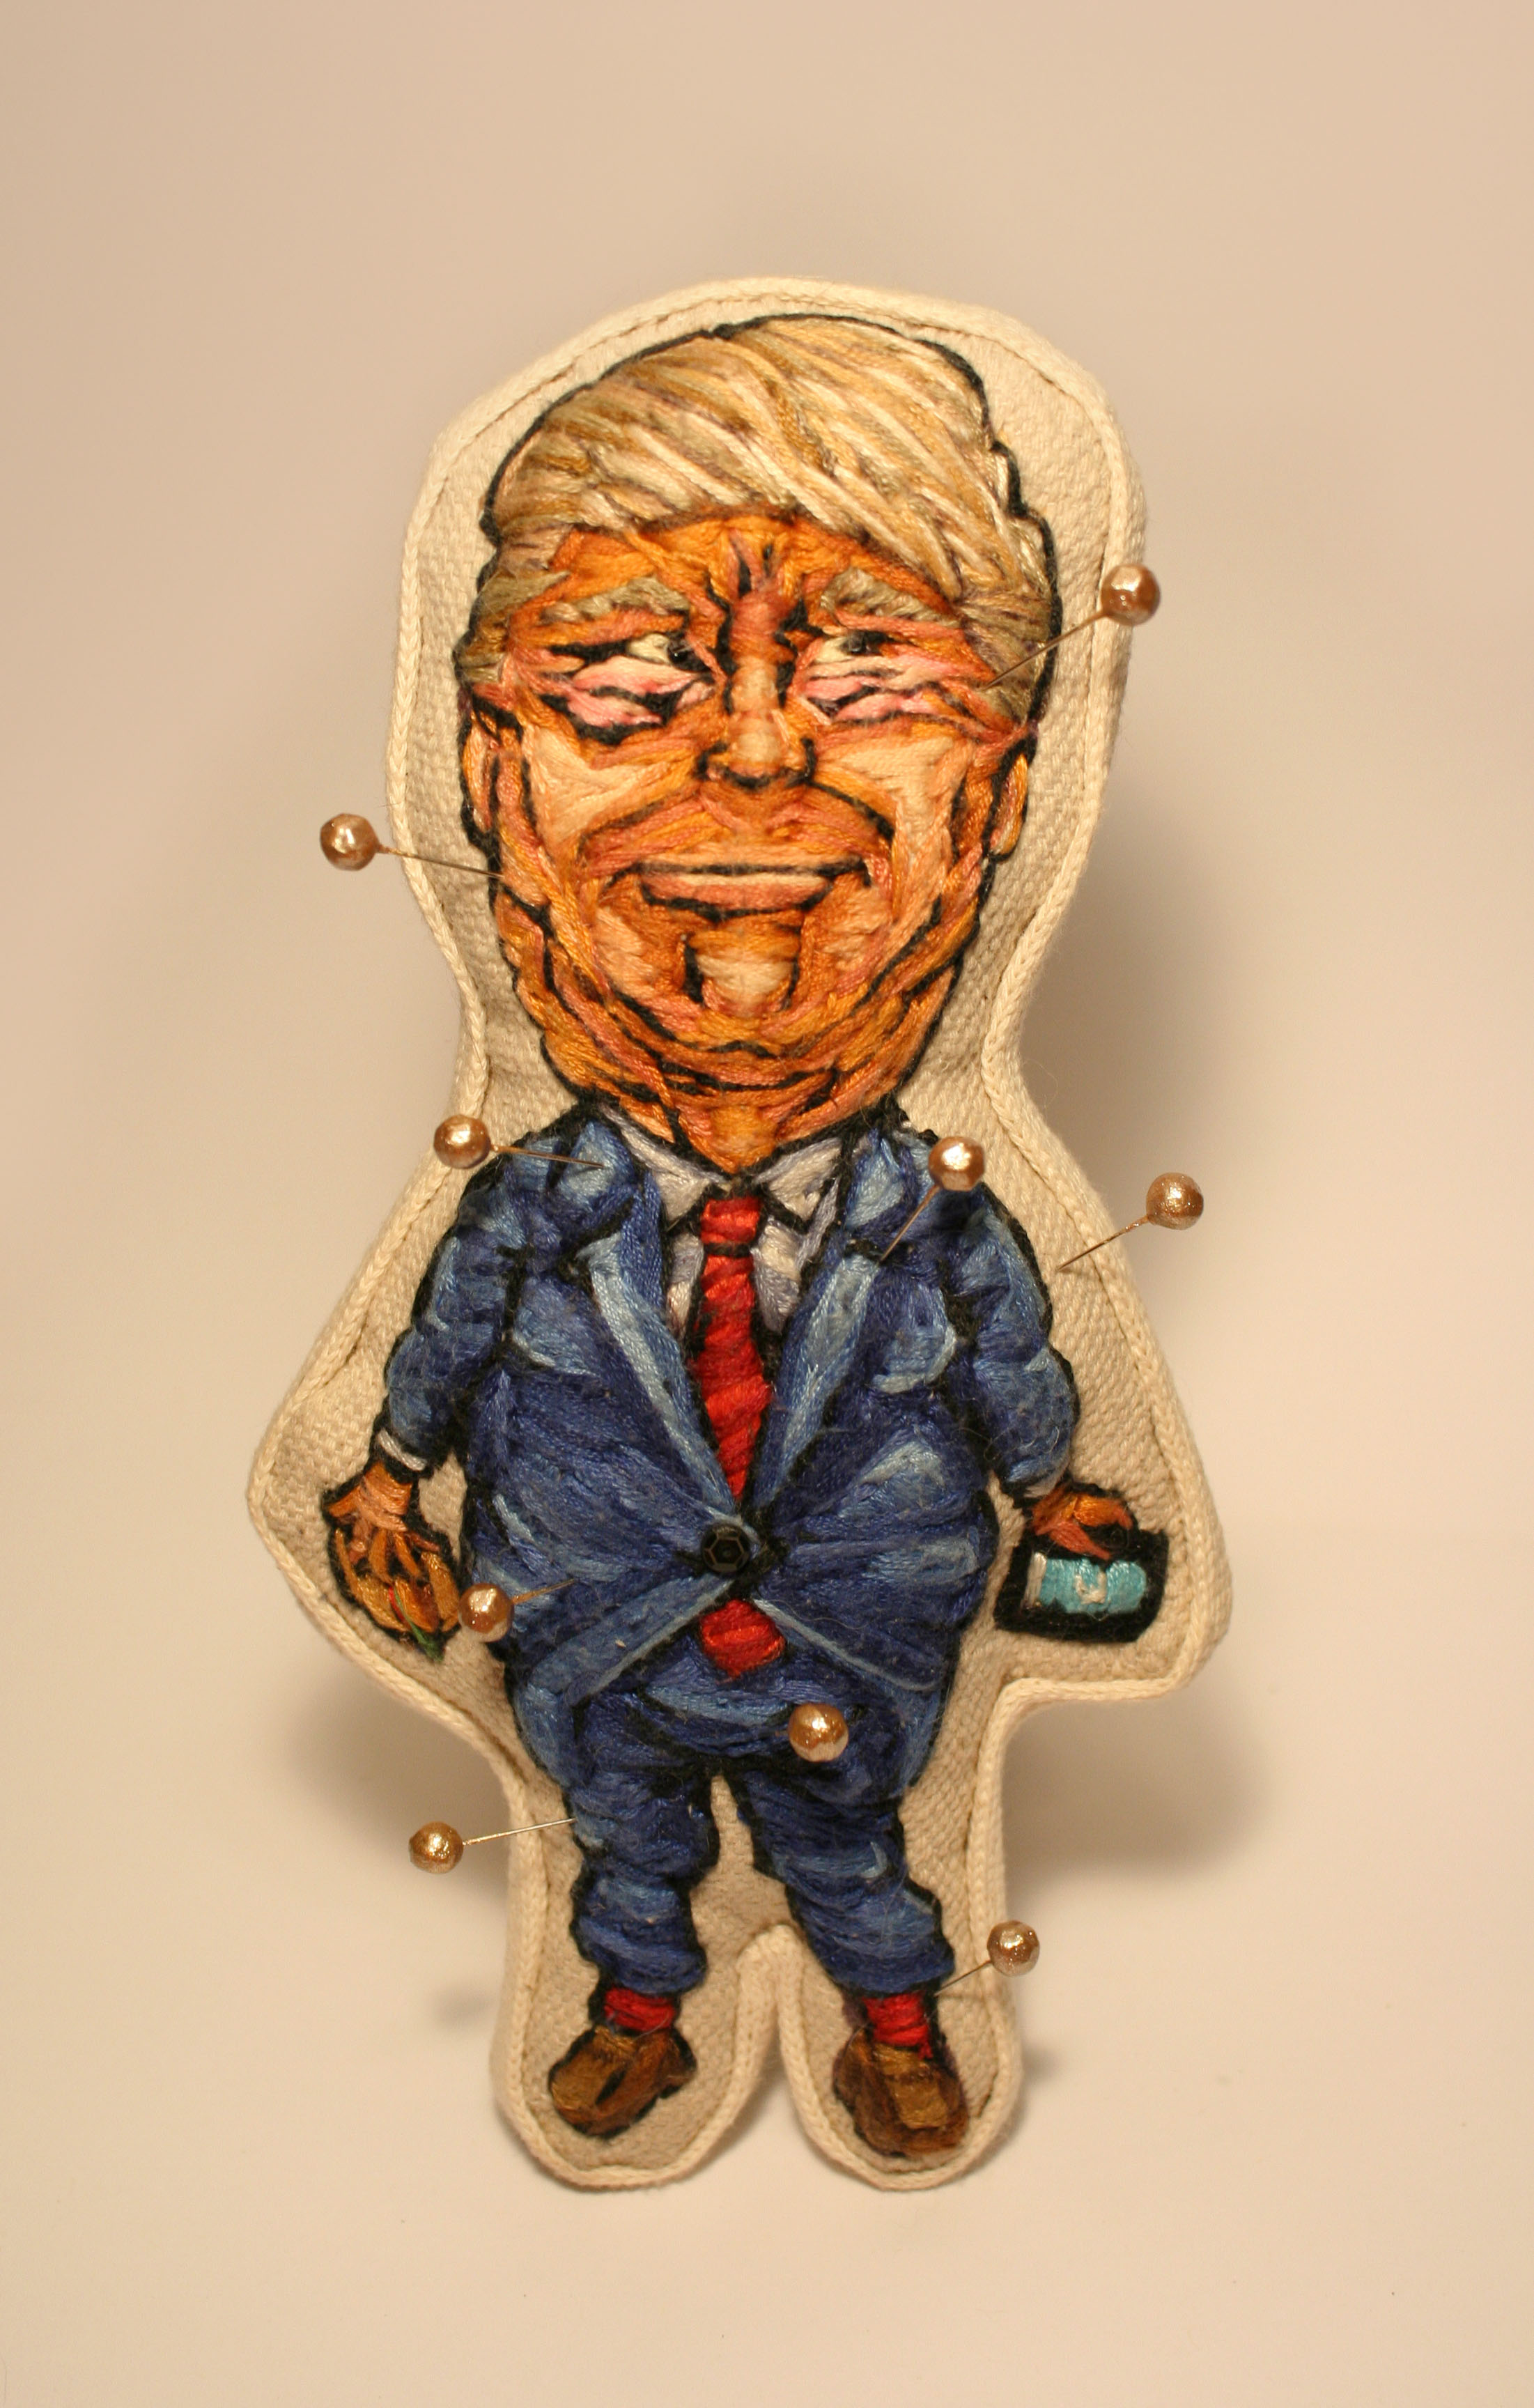 110-donald-trump-voodoo-doll-pin-cusion-embroidery-caricature-15937239419403.jpg